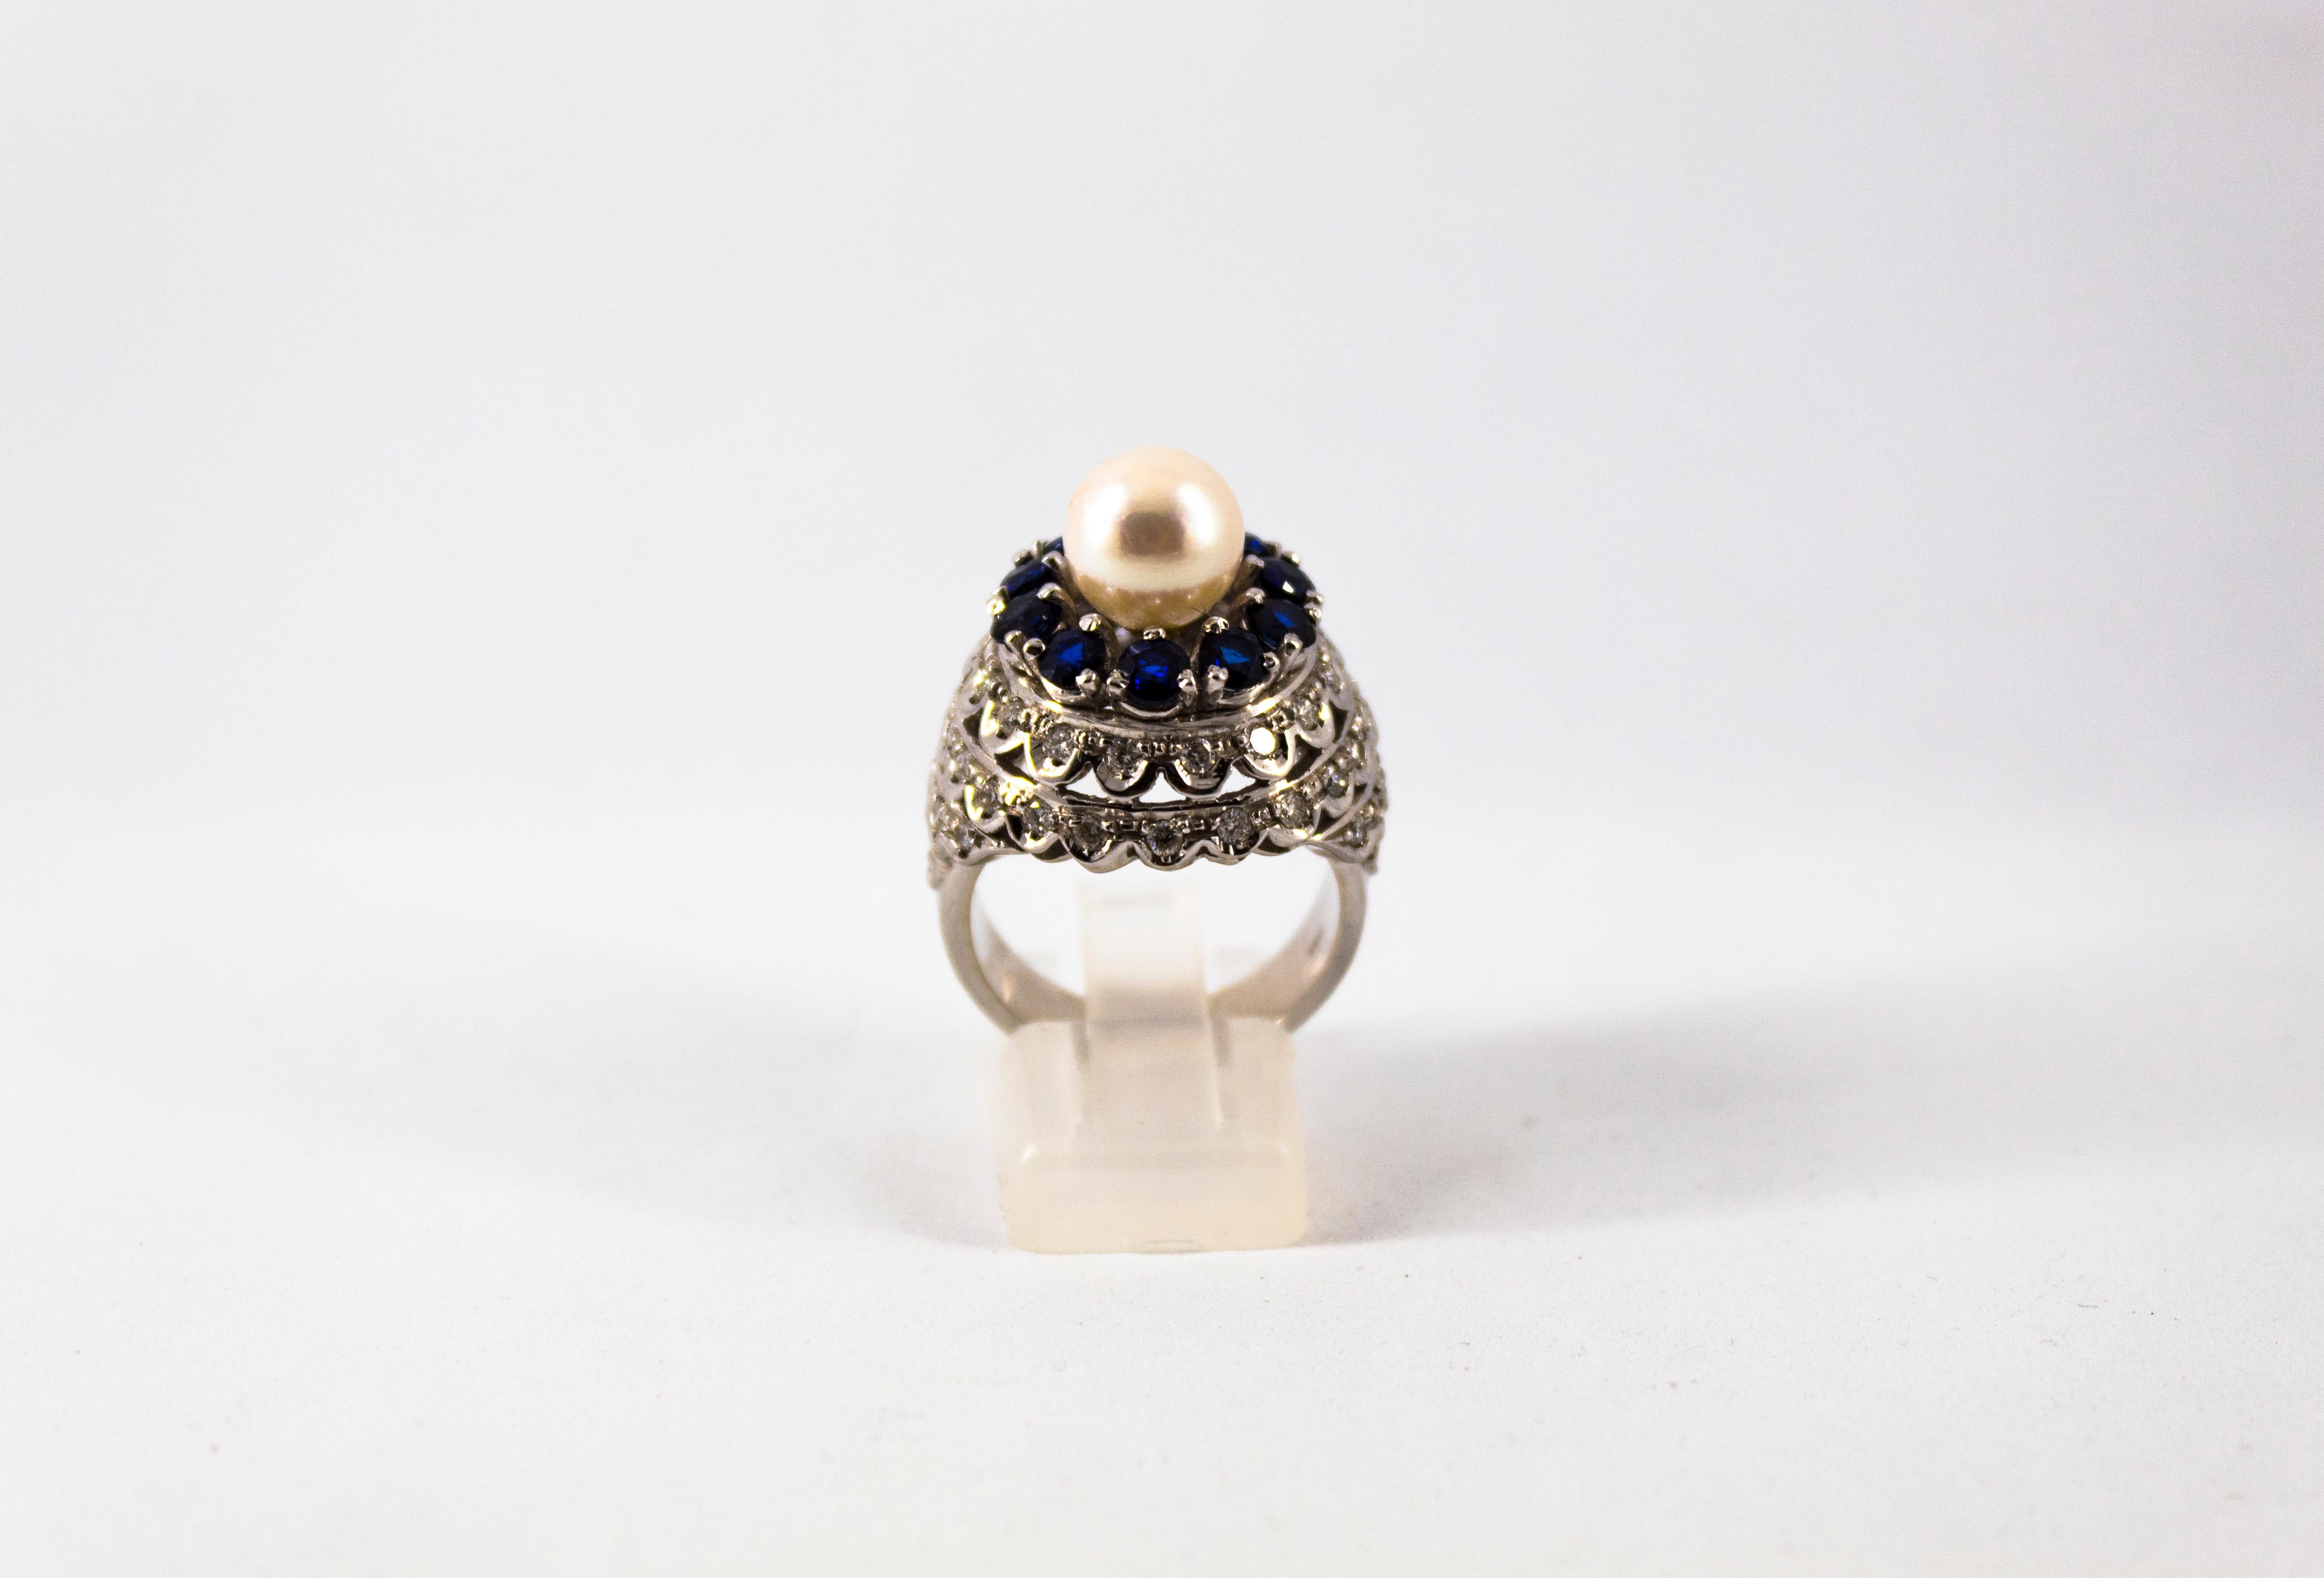 This Ring is made of 18K White Gold.
This Ring has 1.30 Carats of White Diamonds.
This Ring has 1.70 Carats of Blue Sapphires.
This Ring has also a Pearl.
Size ITA: 15 USA: 7 1/4
We're a workshop so every piece is handmade, customizable and